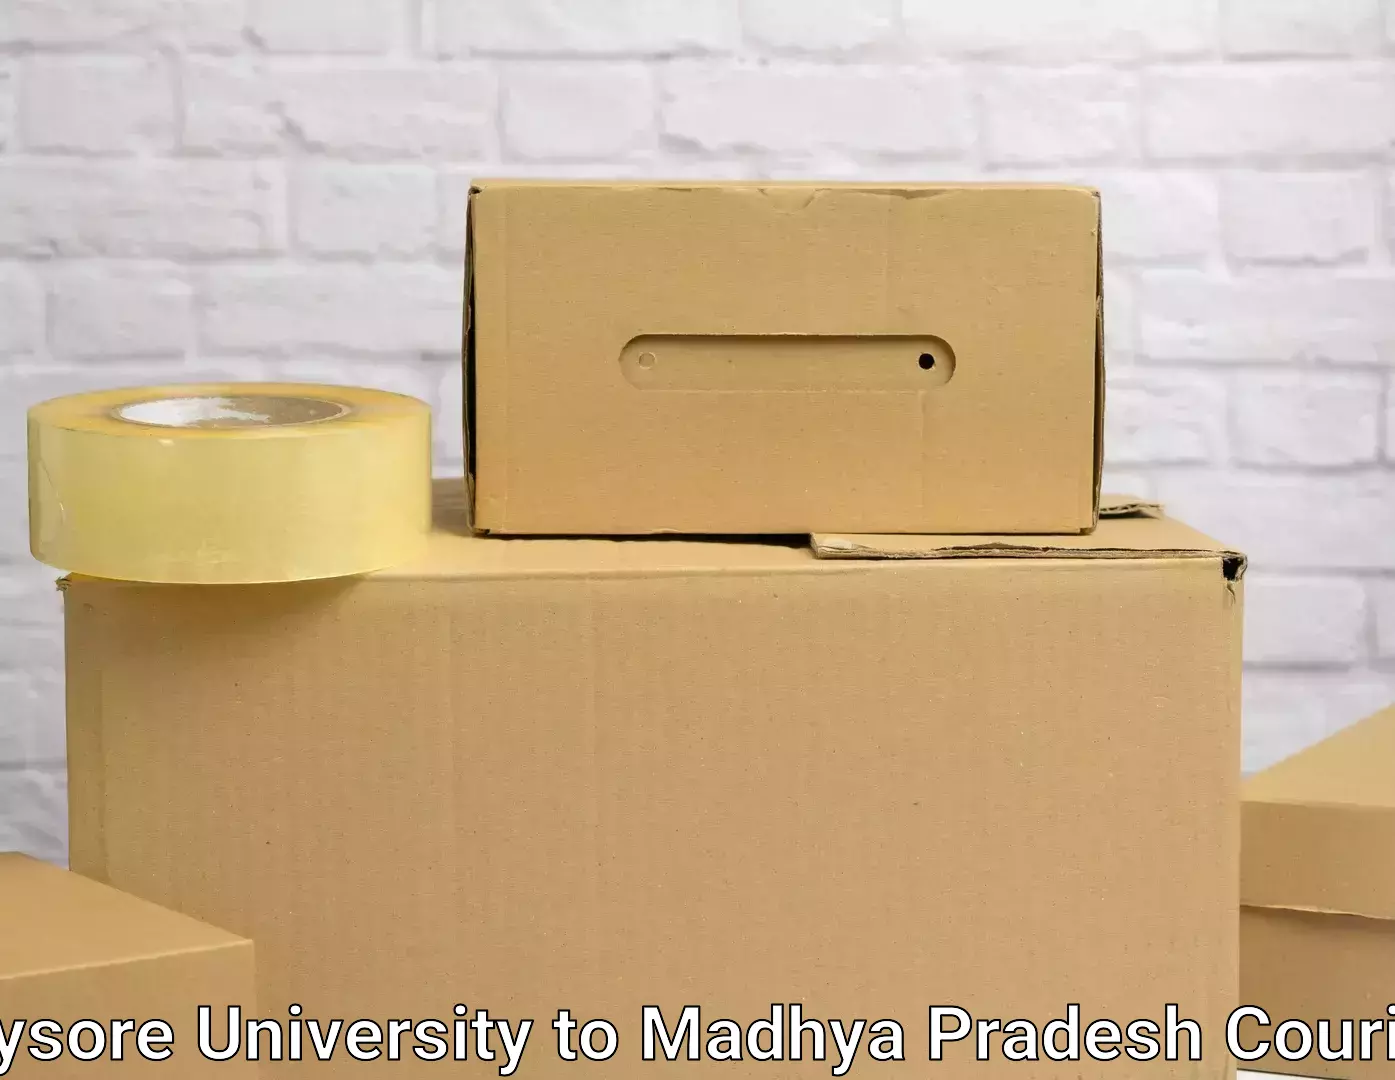 Packing and moving services Mysore University to Ranchha